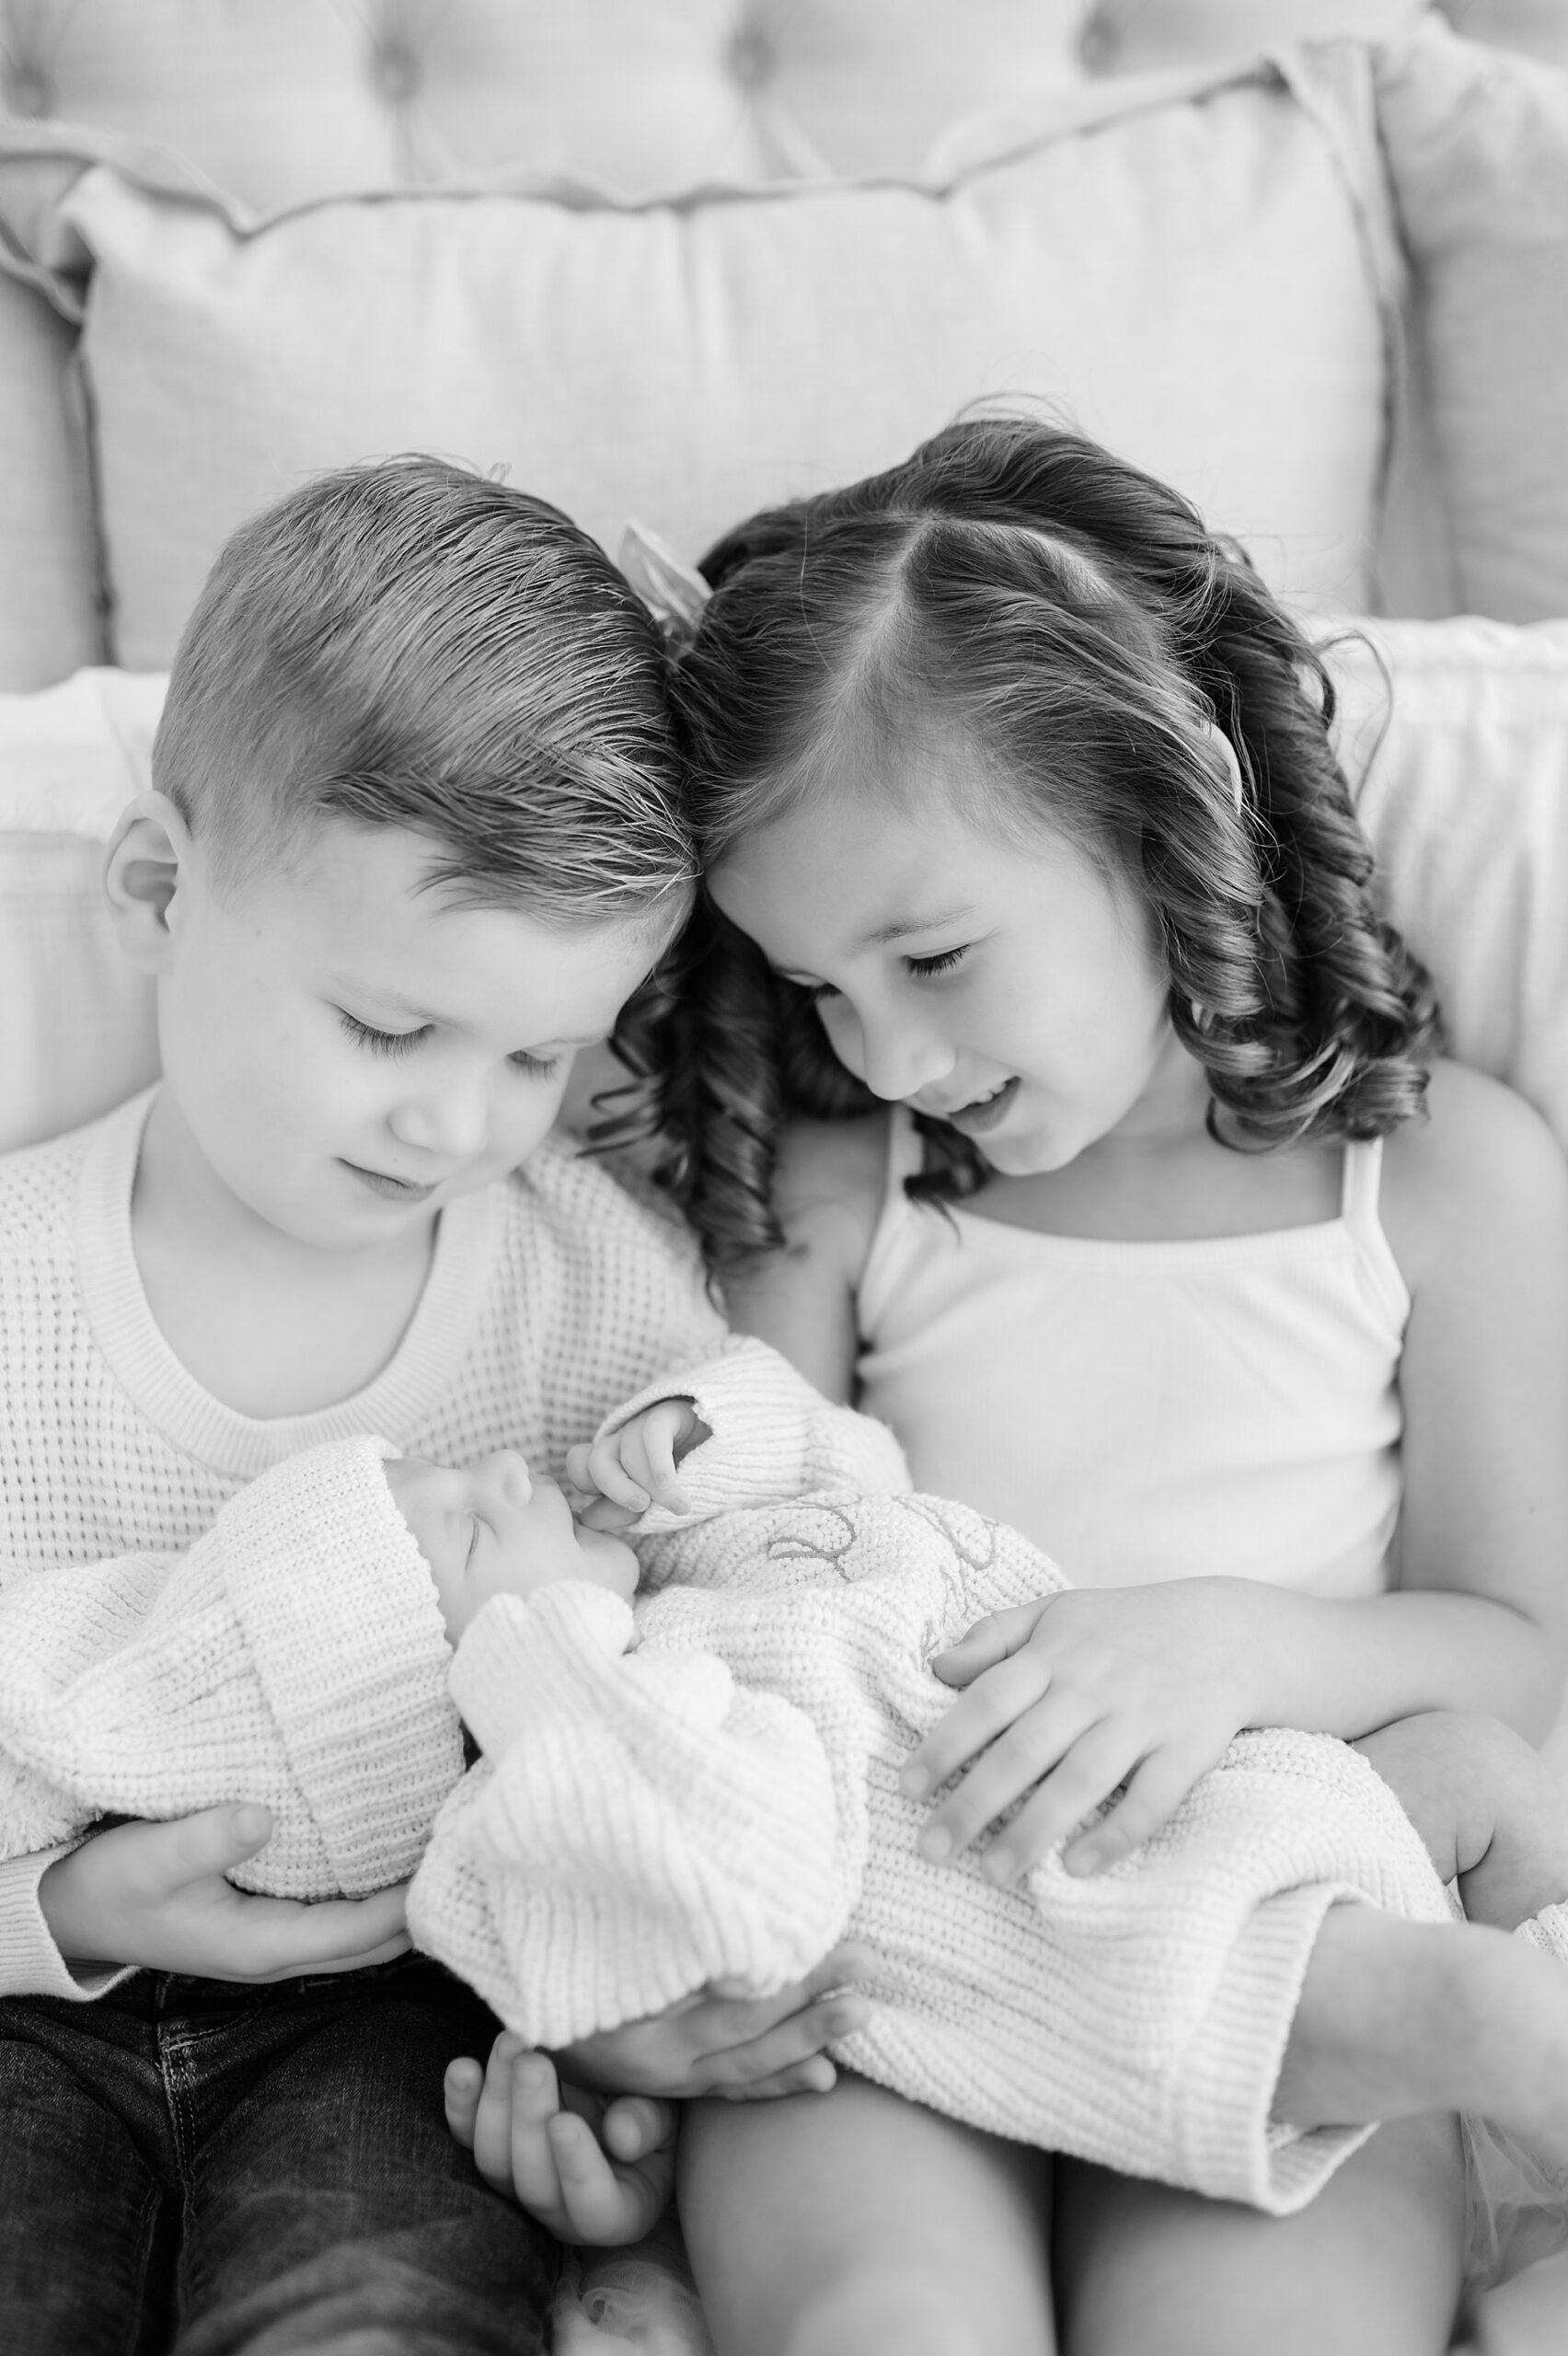 older siblings hold their baby brother photographed by Lindsey Dutton Photography, a Dallas newborn photographer
